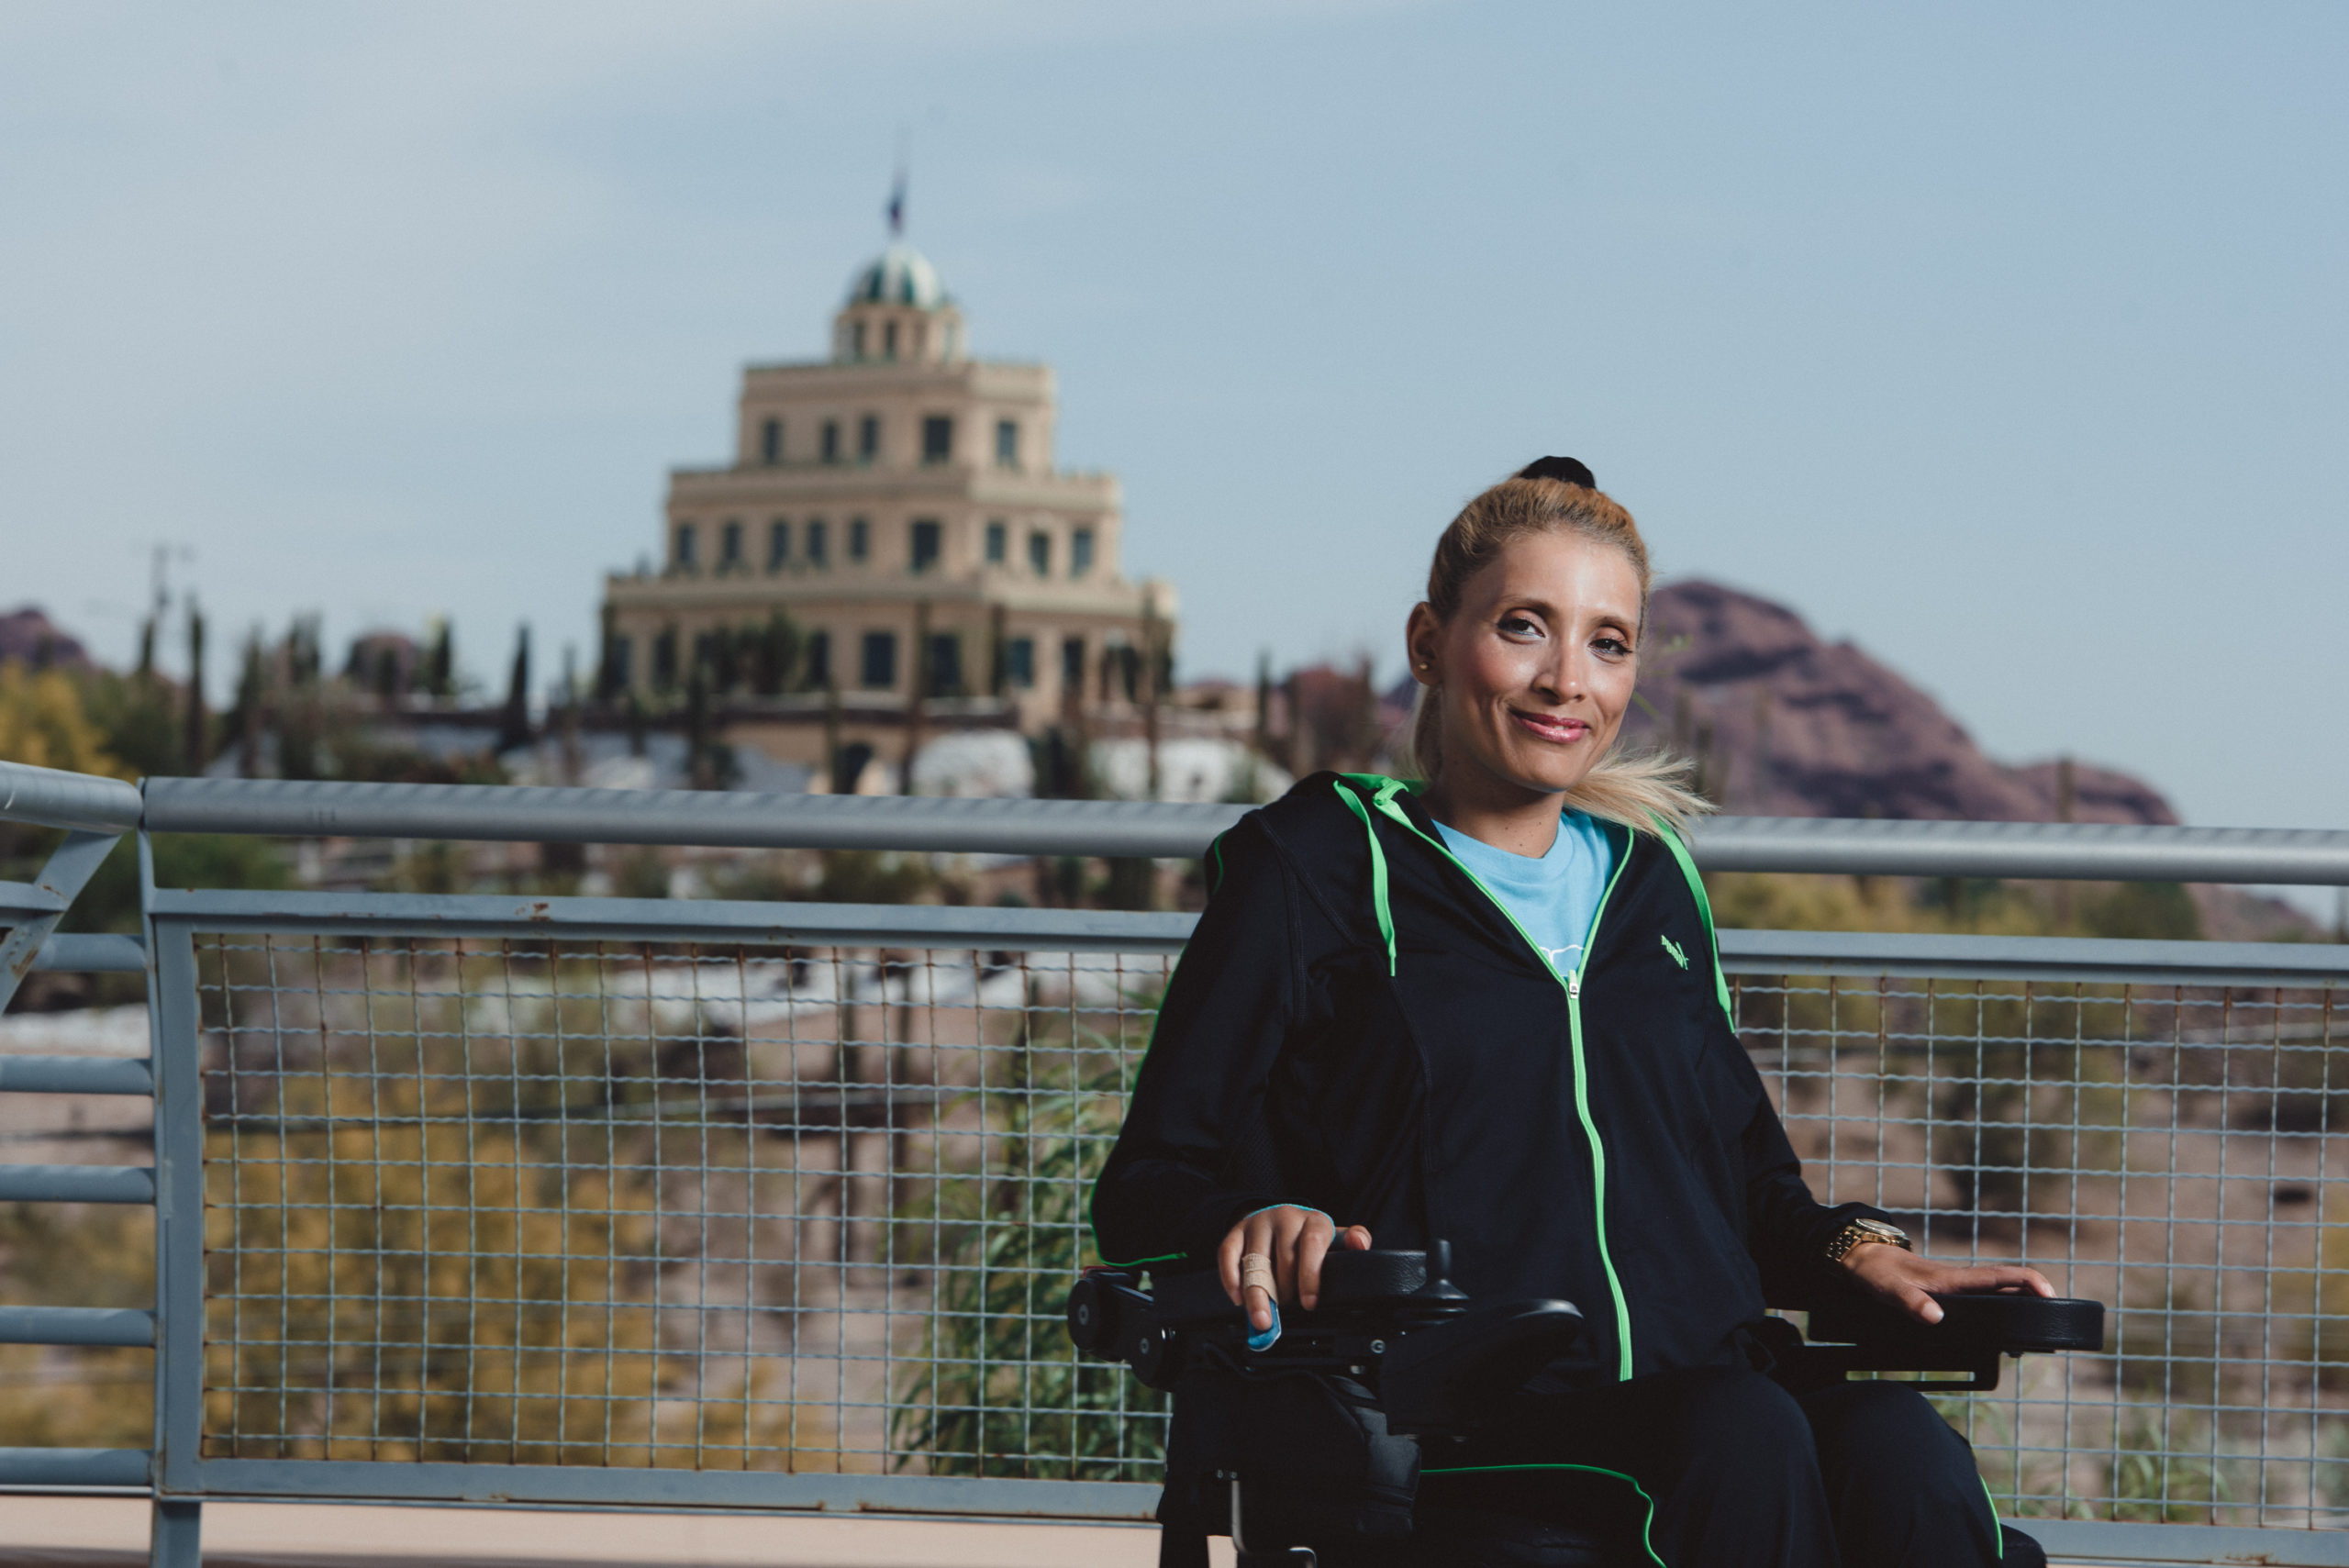 Rola Al-Amer Allaweh sits in her wheelchair smiling at the camera. In the background is a four story structure in the desert of Arizona.